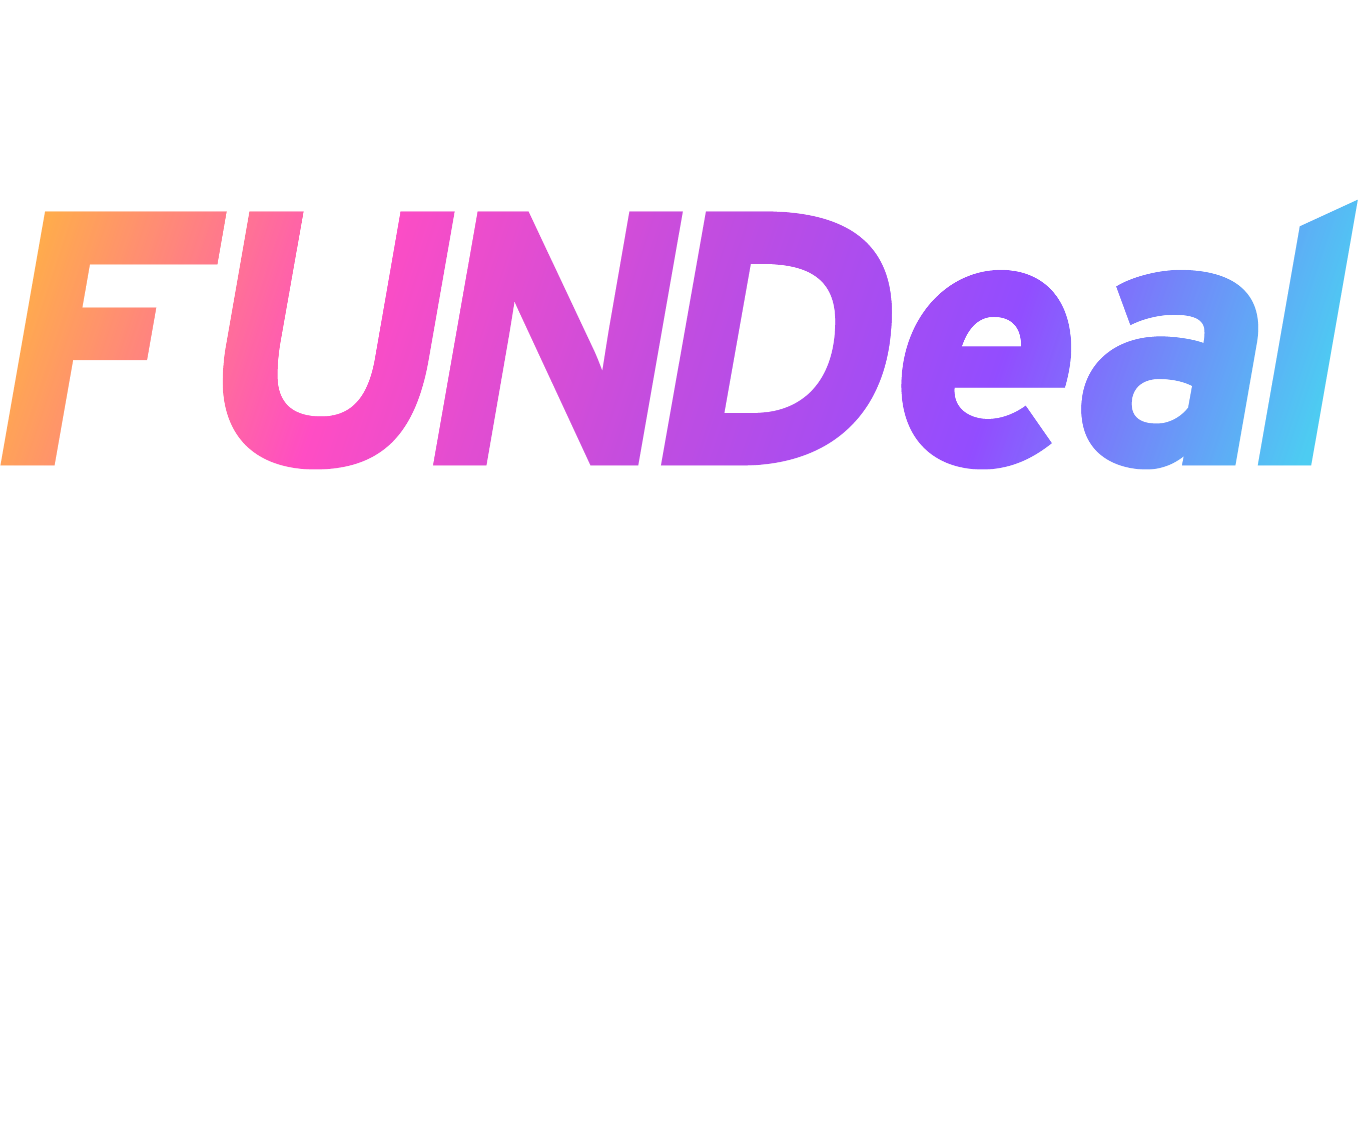 Startup JAPAN FUNDeal 2023 11.14 TUE - 11.15 WED 開催 東京ビッグサイト